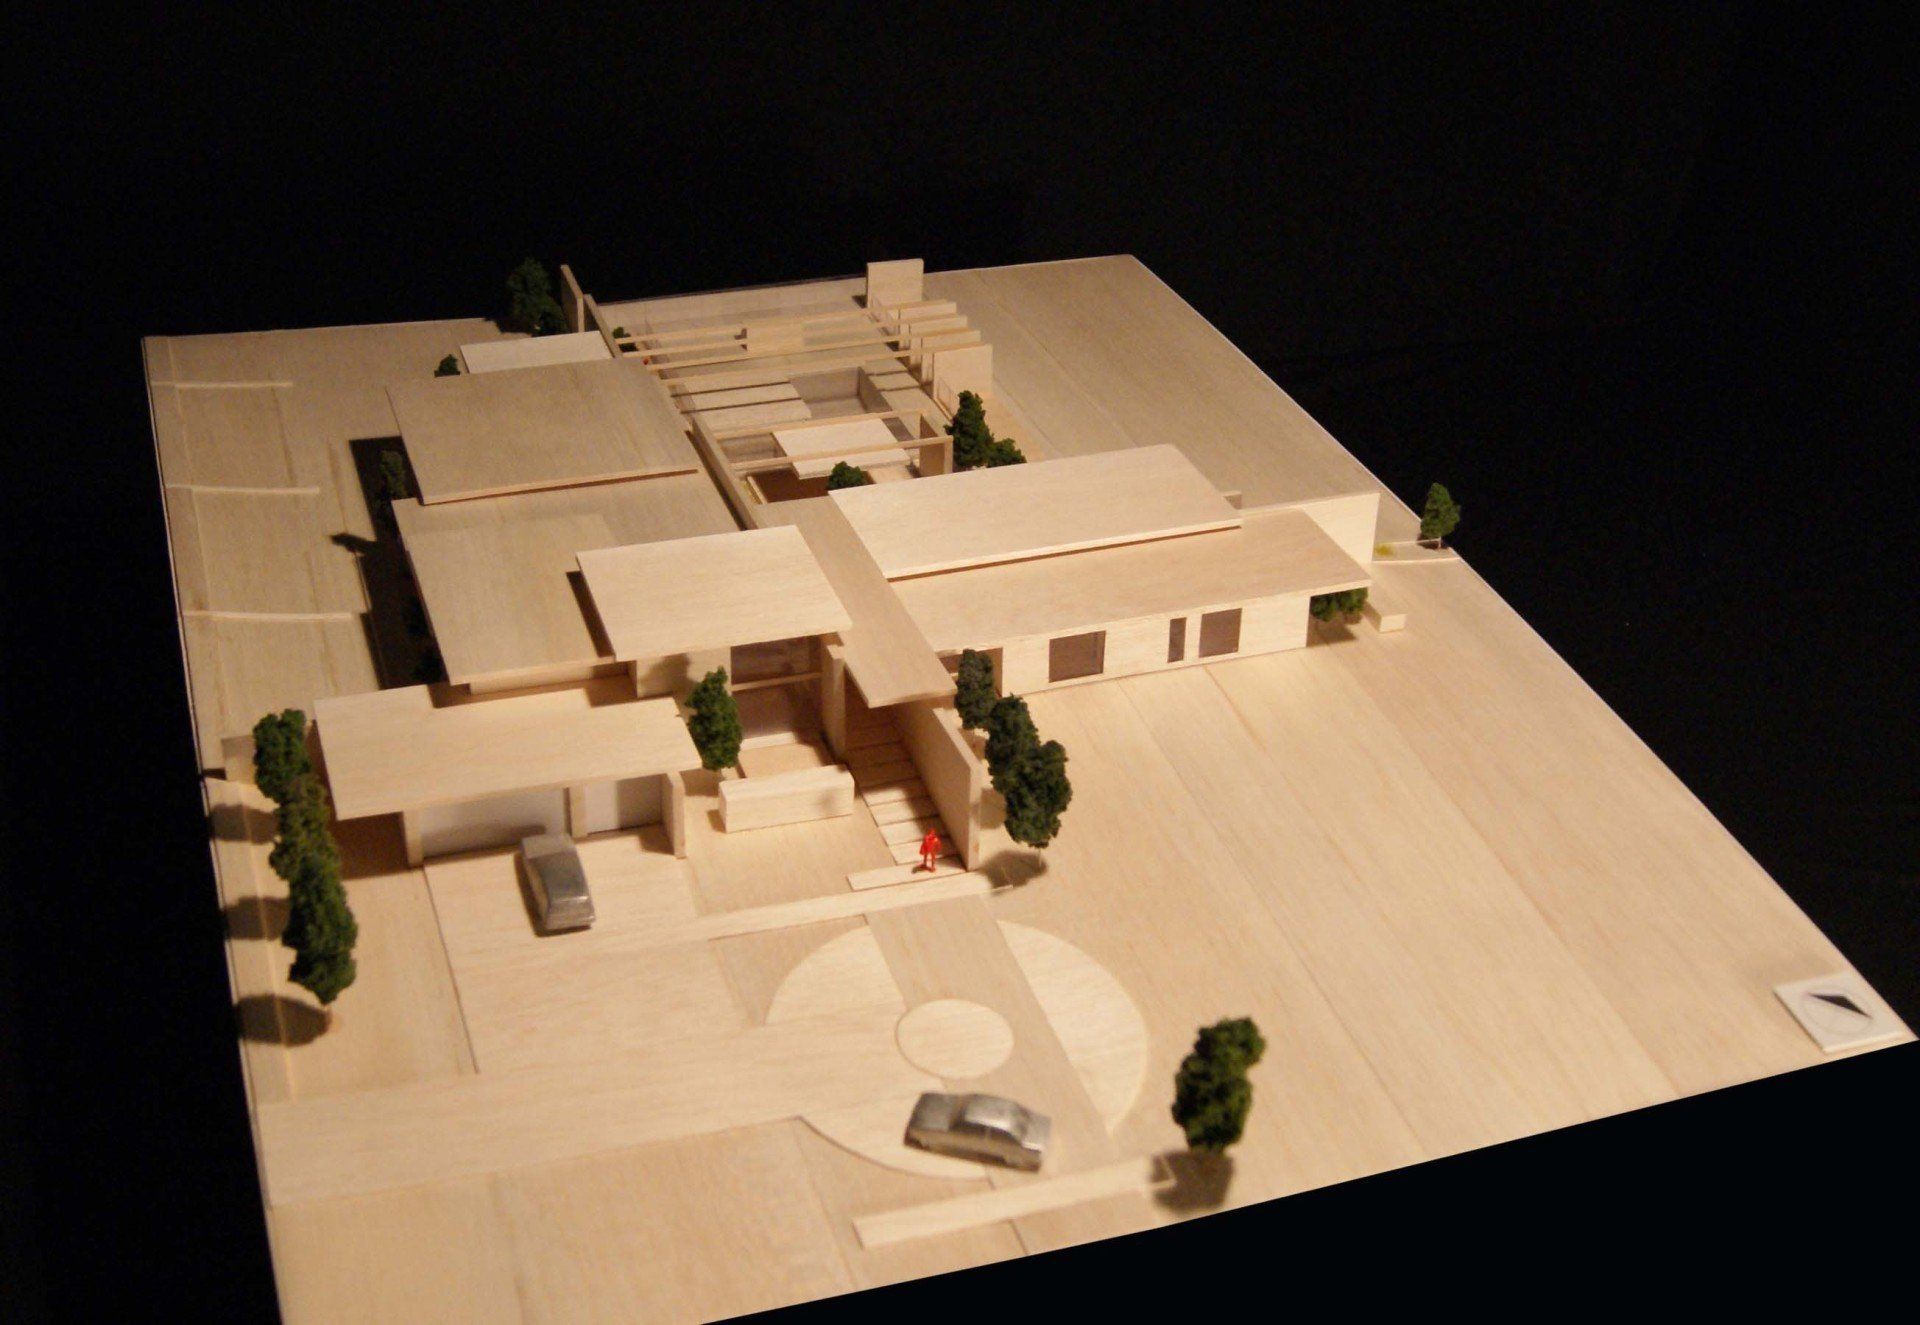 A model of a new residential home